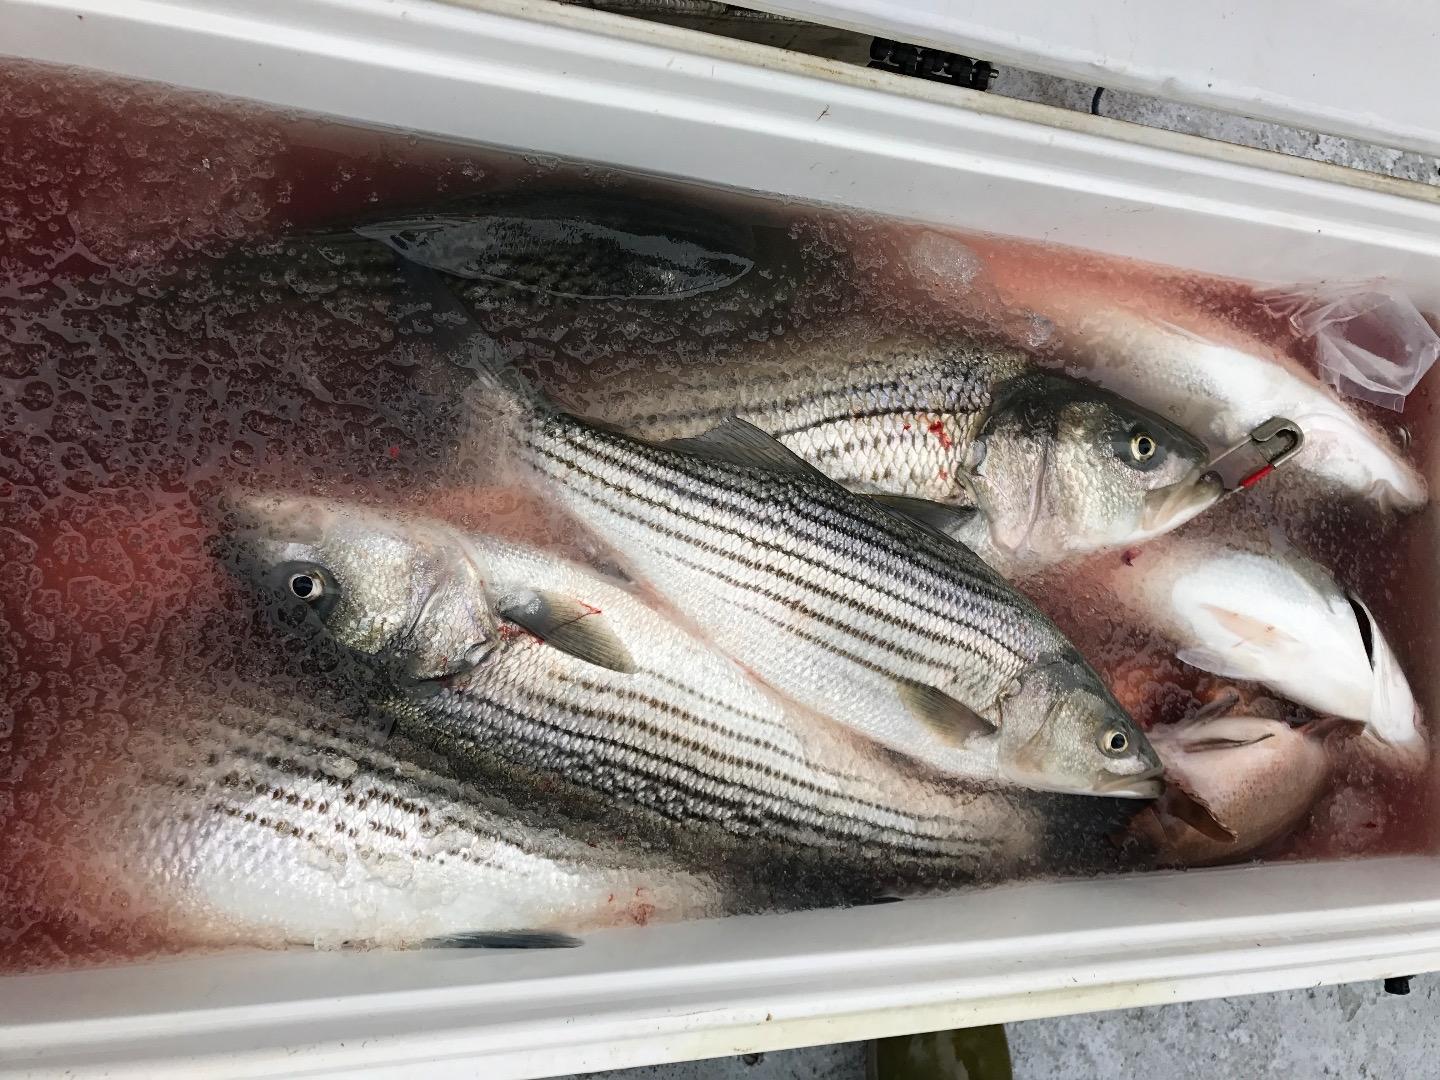 Limits of striped bass by 8:30 AM